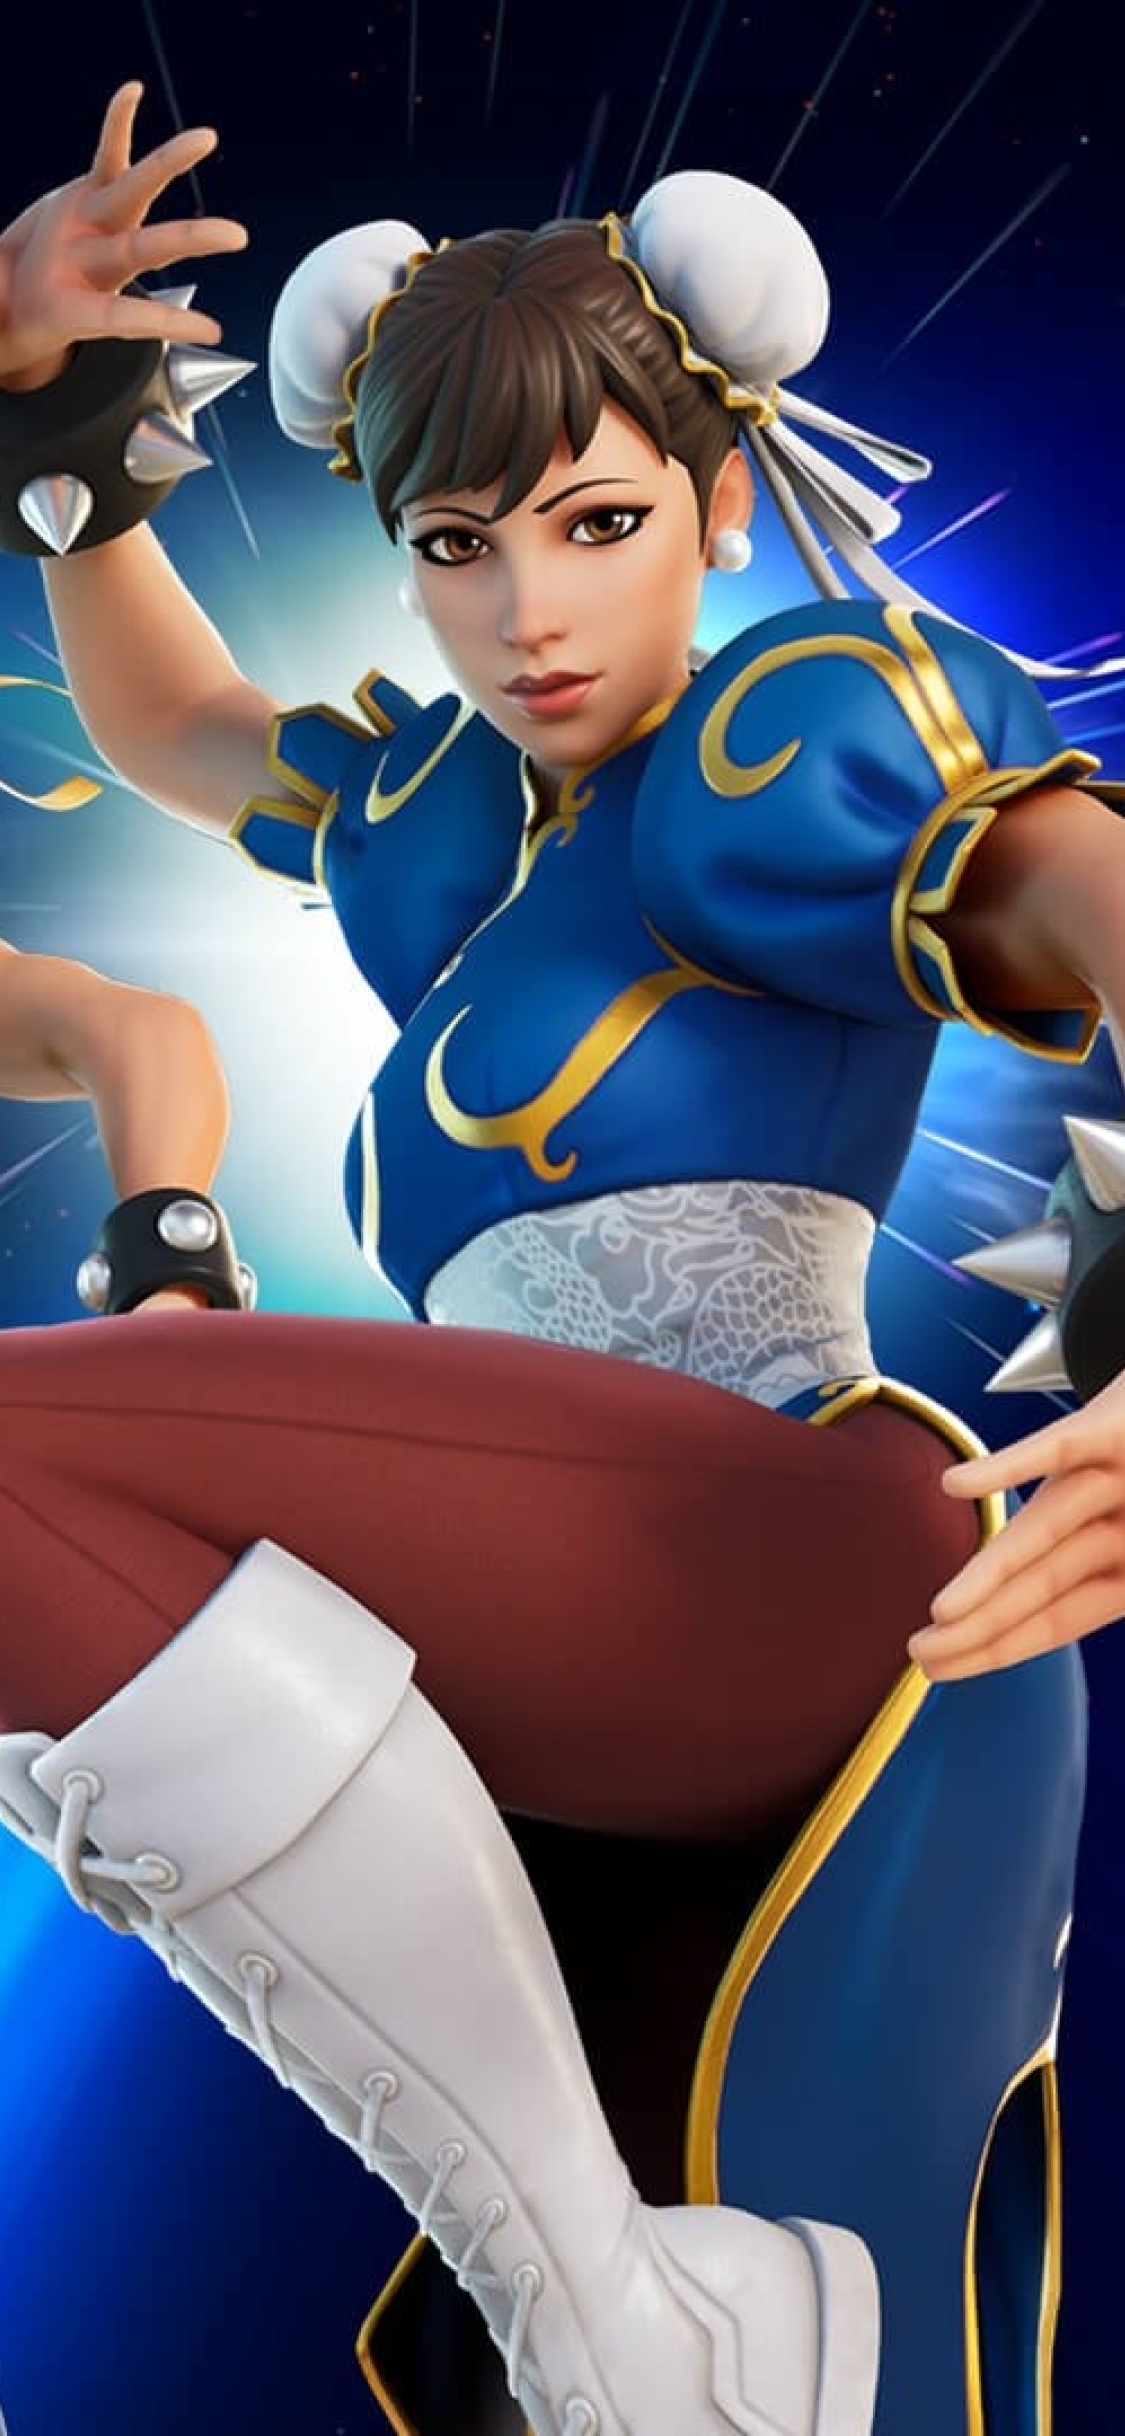 1125x2436 Chun Li Street Fighter Iphone Xs Iphone 10 Iphone X Wallpaper Hd Games 4k Wallpapers Images Photos And Background Wallpapers Den